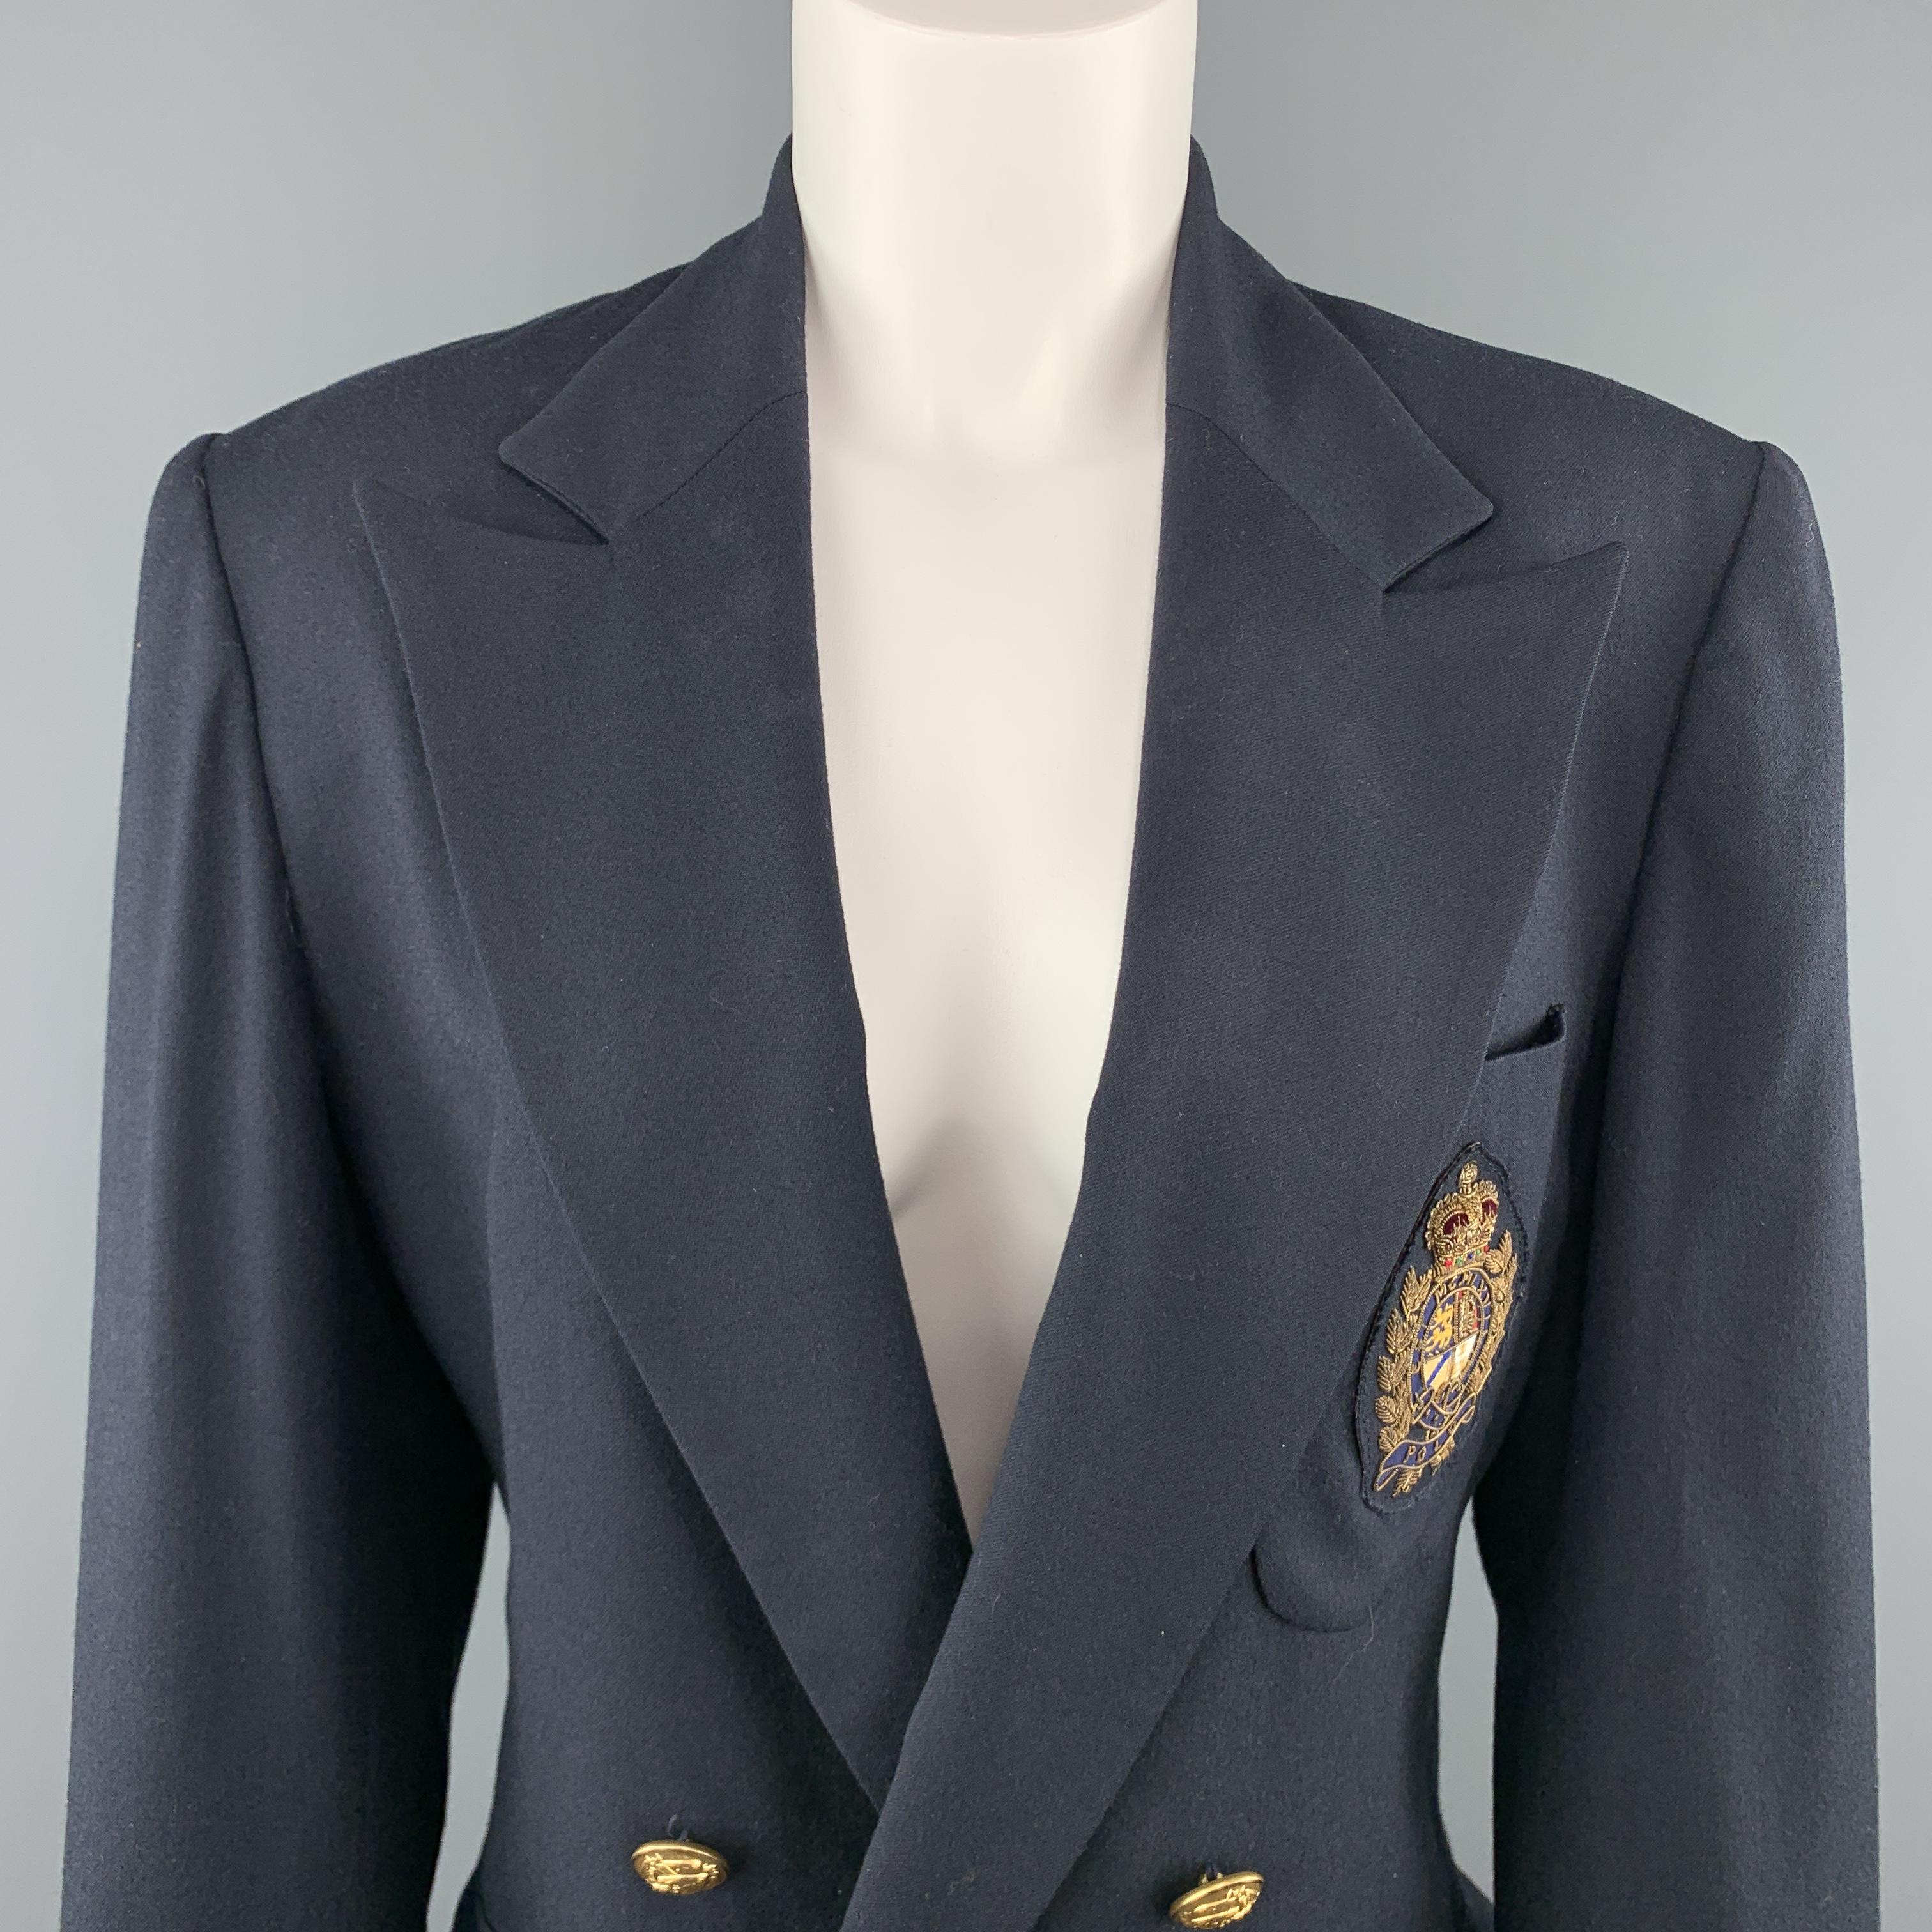 Vintage RALPH LAUREN blazer comes in navy blue wool with a double breasted gold tone button front, peak lapel, patch flap pockets, and embroidered crest patch. Made in Italy.

Very Good Pre-Owned Condition.
Marked: 8

Measurements:

Shoulder: 17